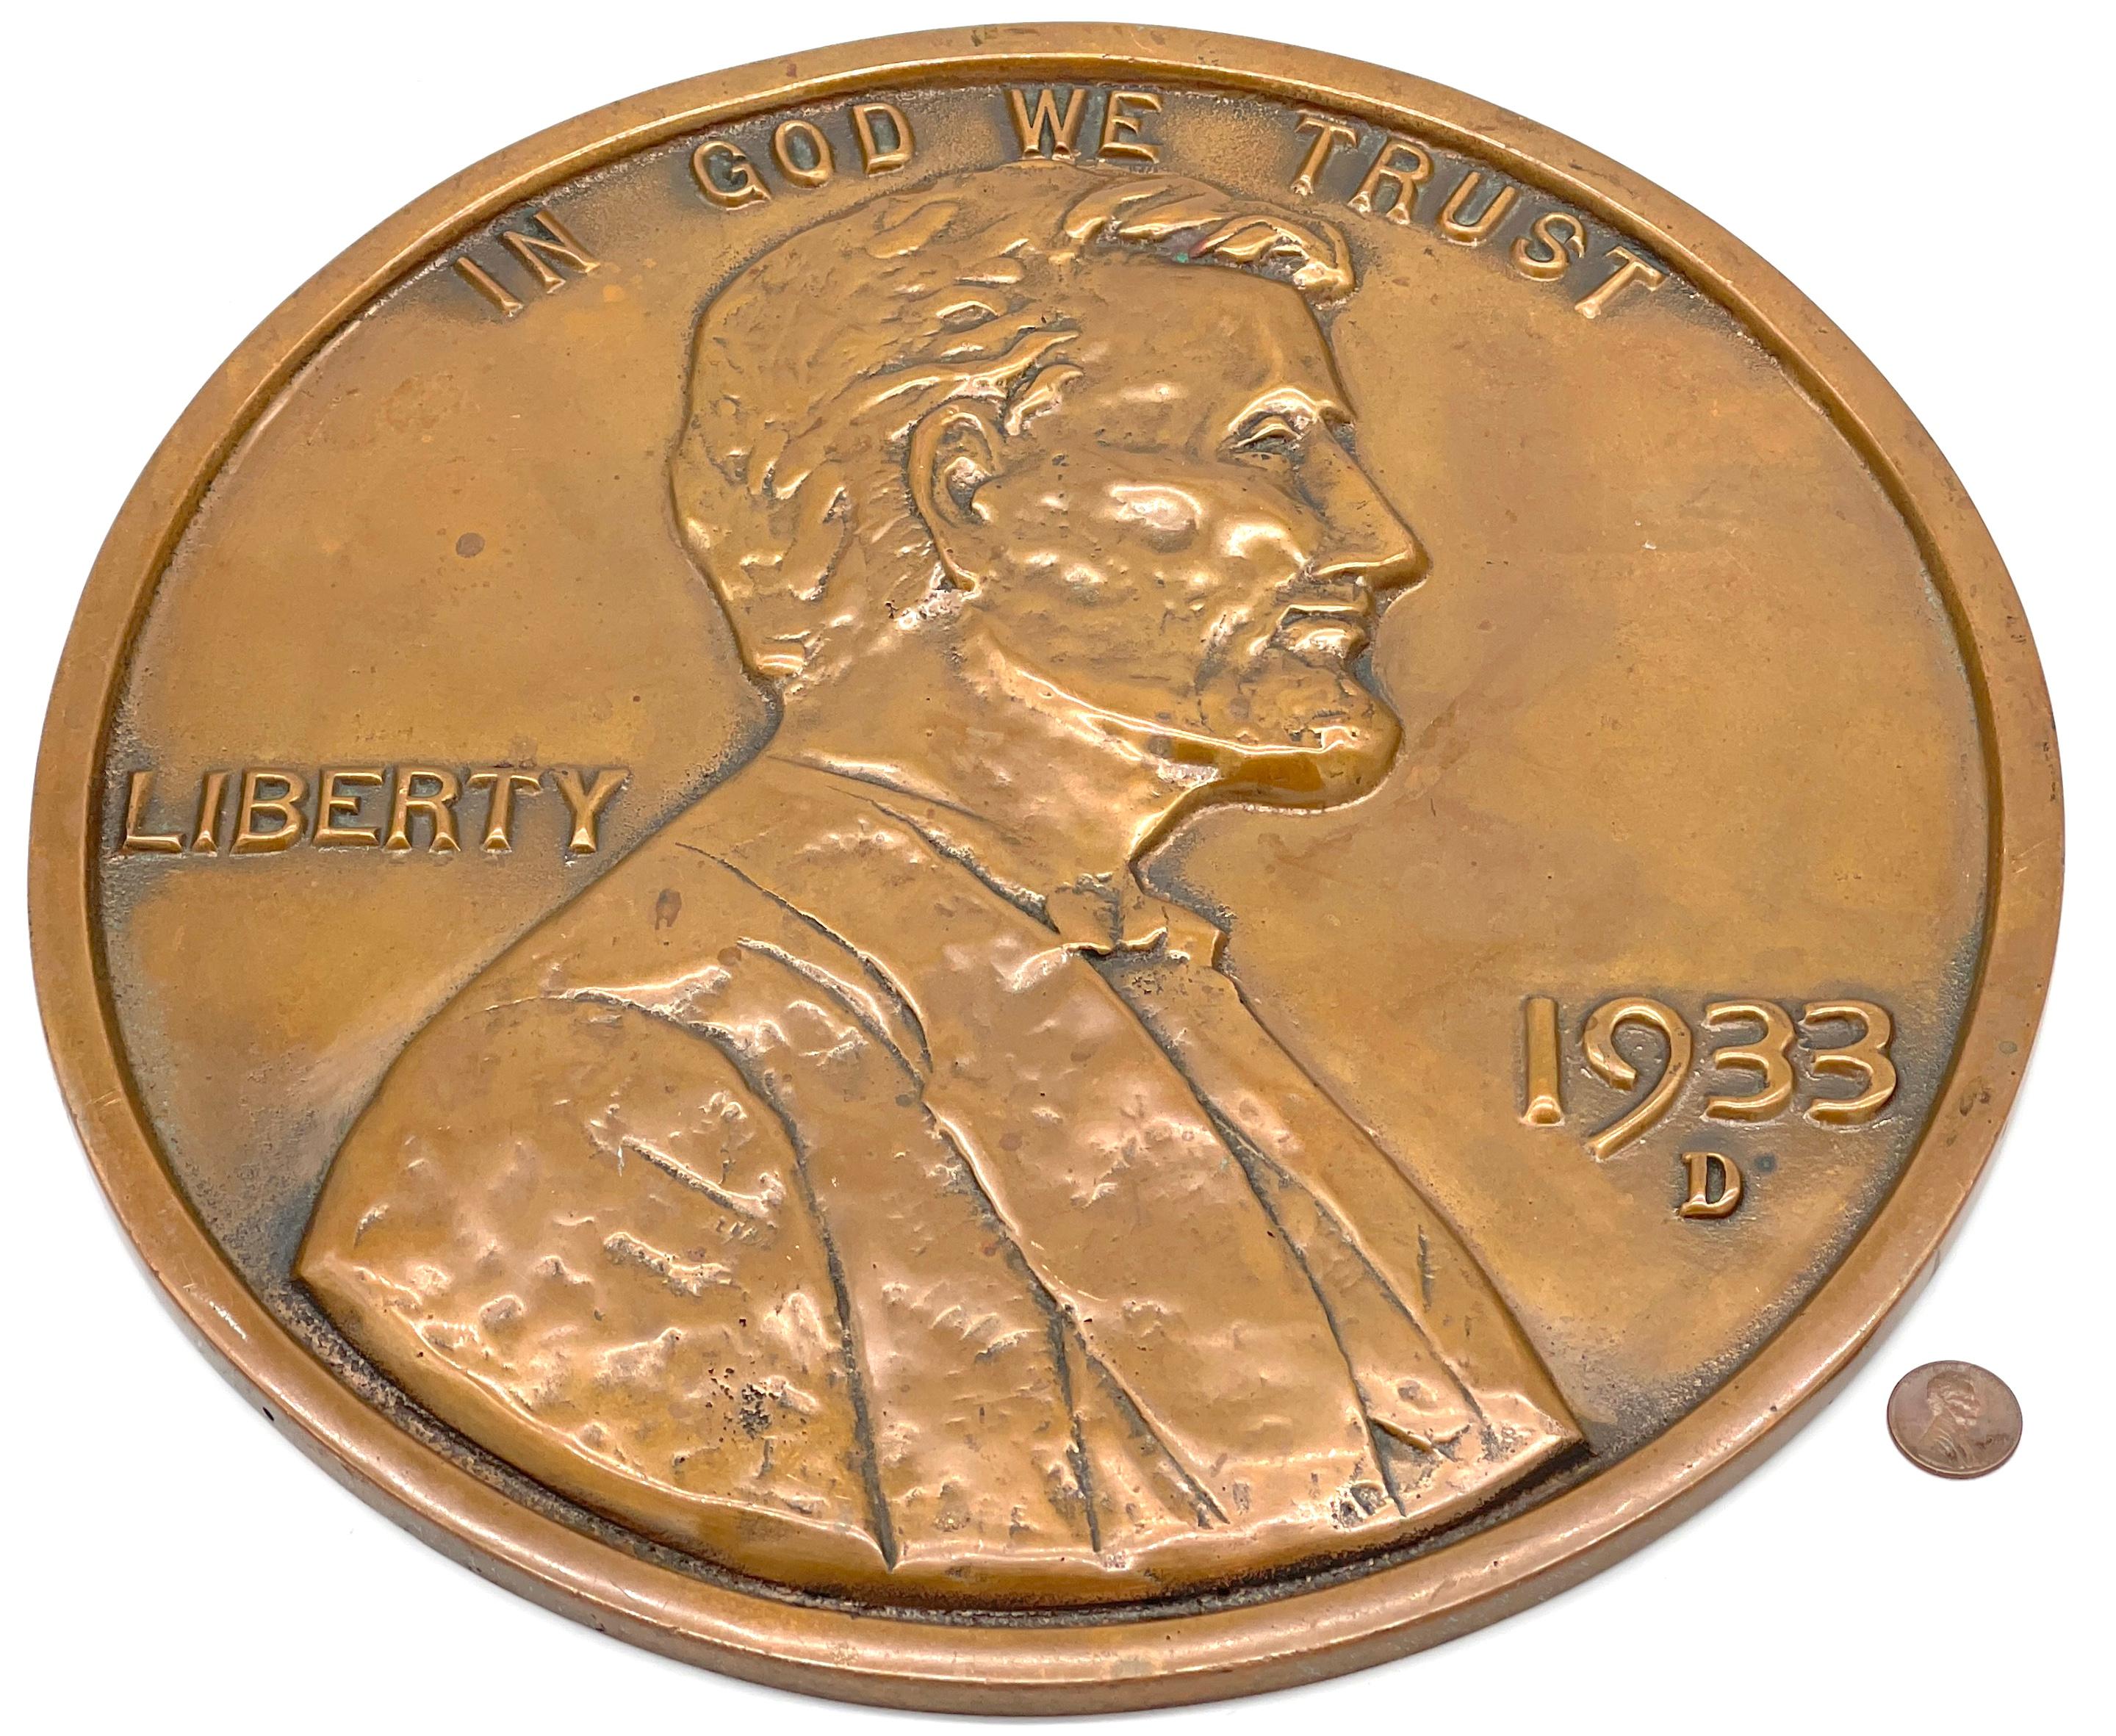 Copper Maquette/Sculpture of Victor David Brenner's 1933 D Lincoln Penny Front/ Obverse For Sale